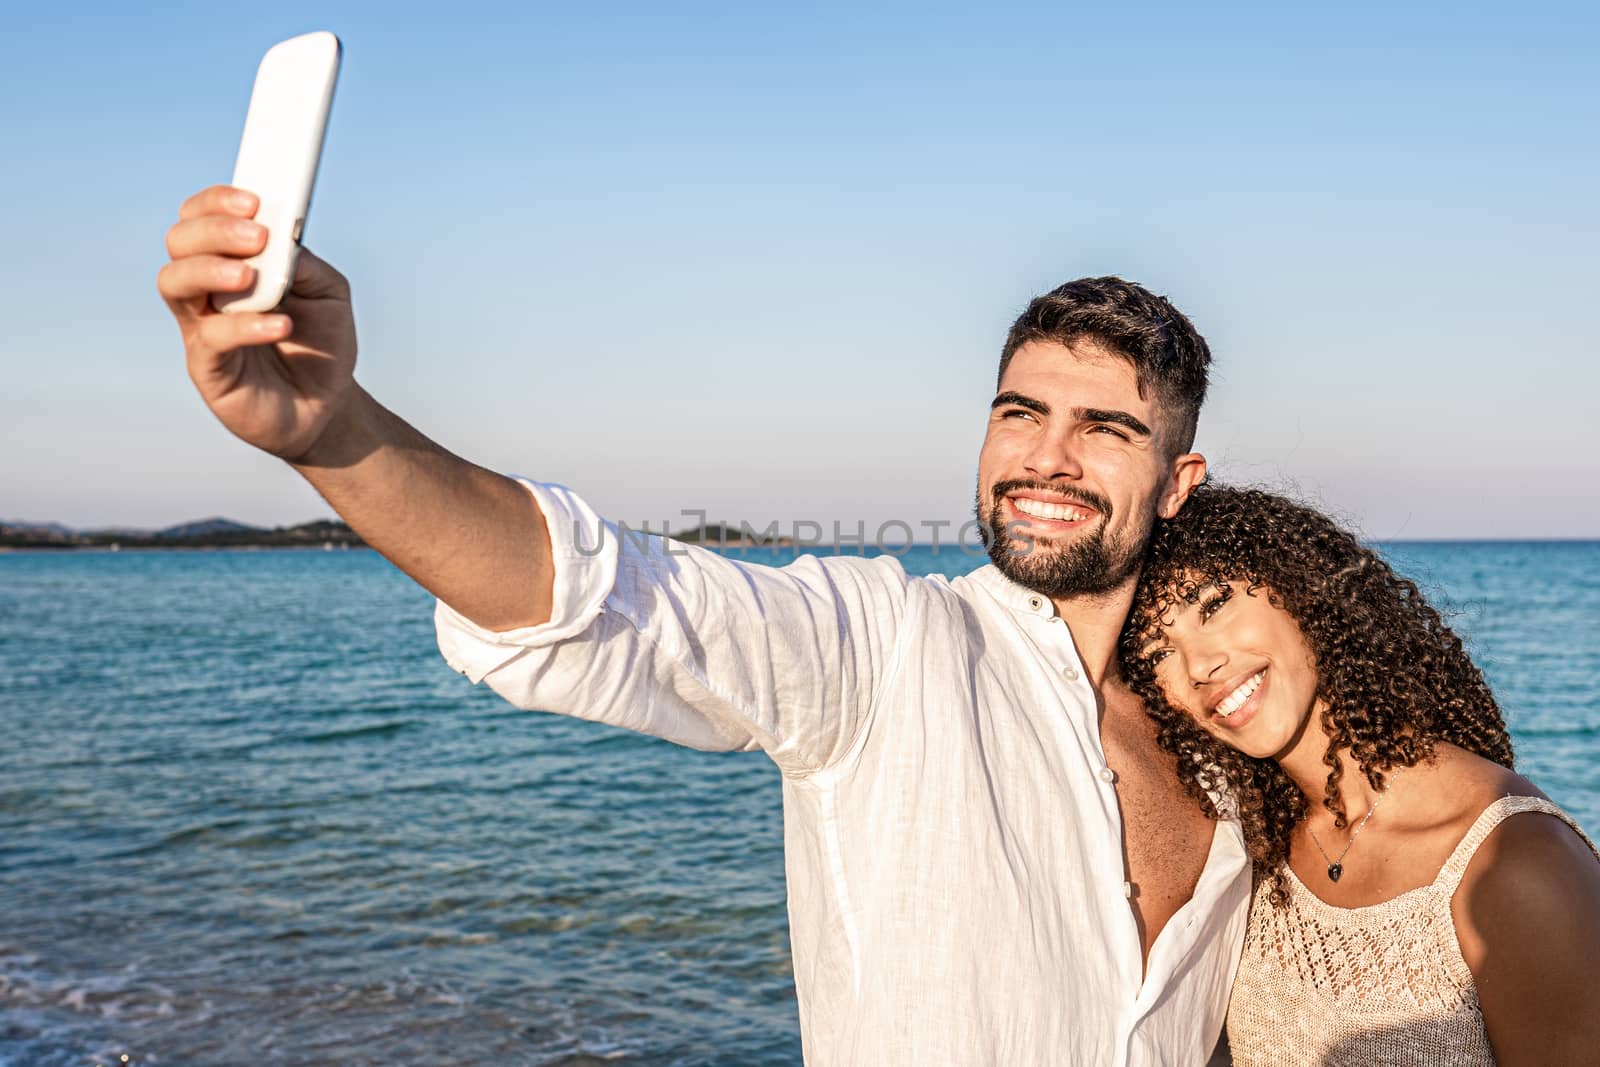 Young mixed race lovers couple at the sunset standing in the seashore makes a self portrait with the smartphone - Caucasian man having fun shooting photo in vacation with her black Hispanic girlfriend by robbyfontanesi